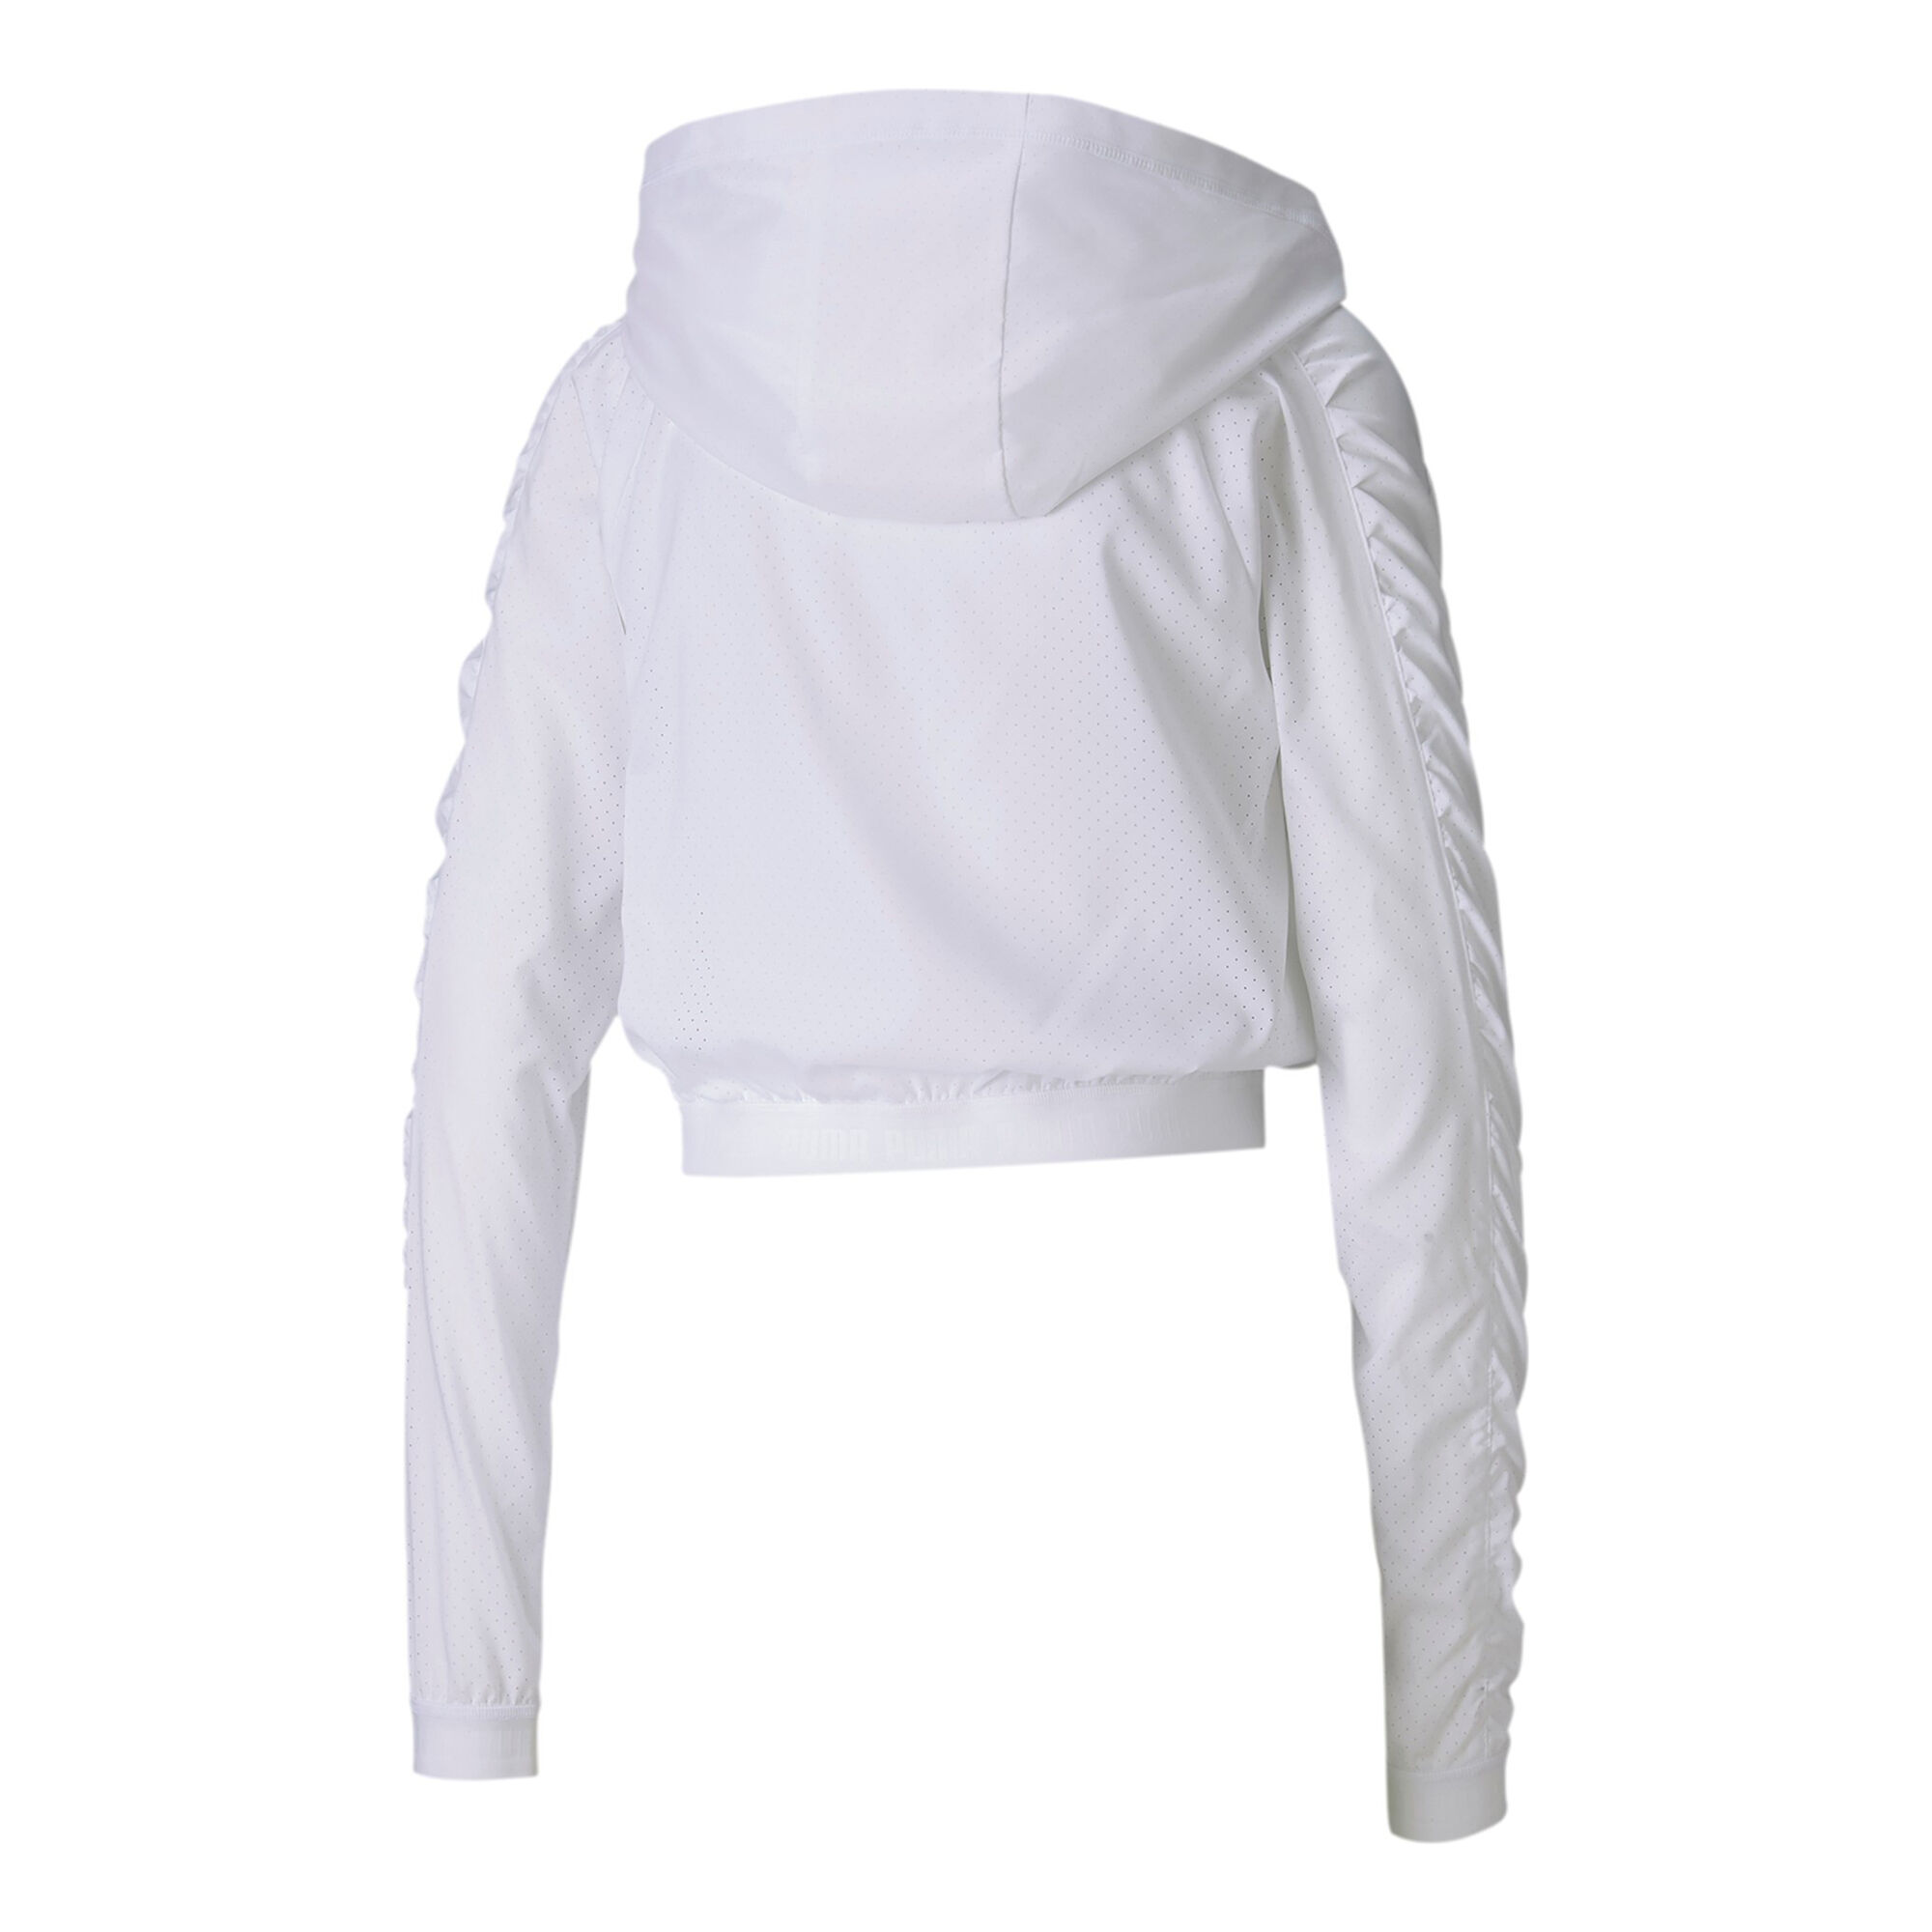 buy Puma Be Bold Woven Training Jacket Women - White, Silver online |  Tennis-Point